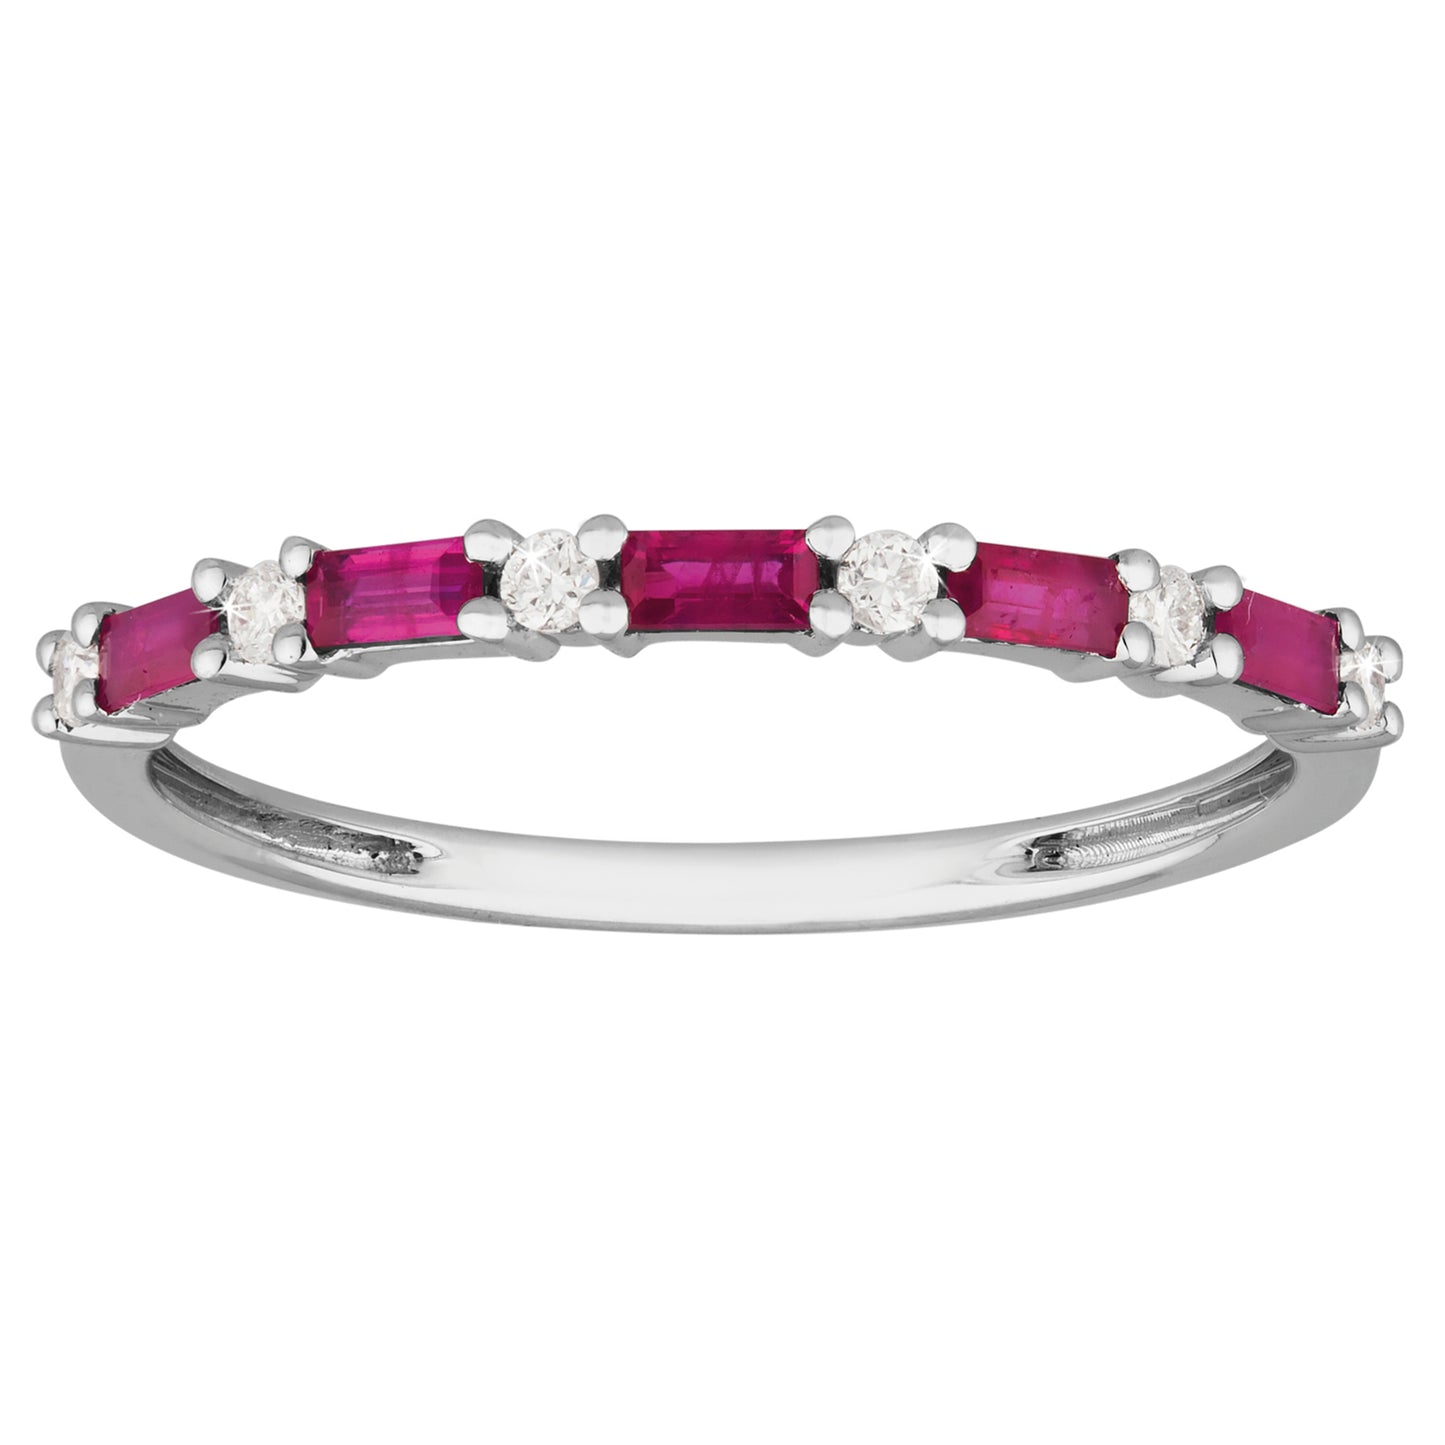 Six Beautiful Baquette Cut Ruby with Small Round Diamond Intervals with a eternity band design in 9ct White Gold.